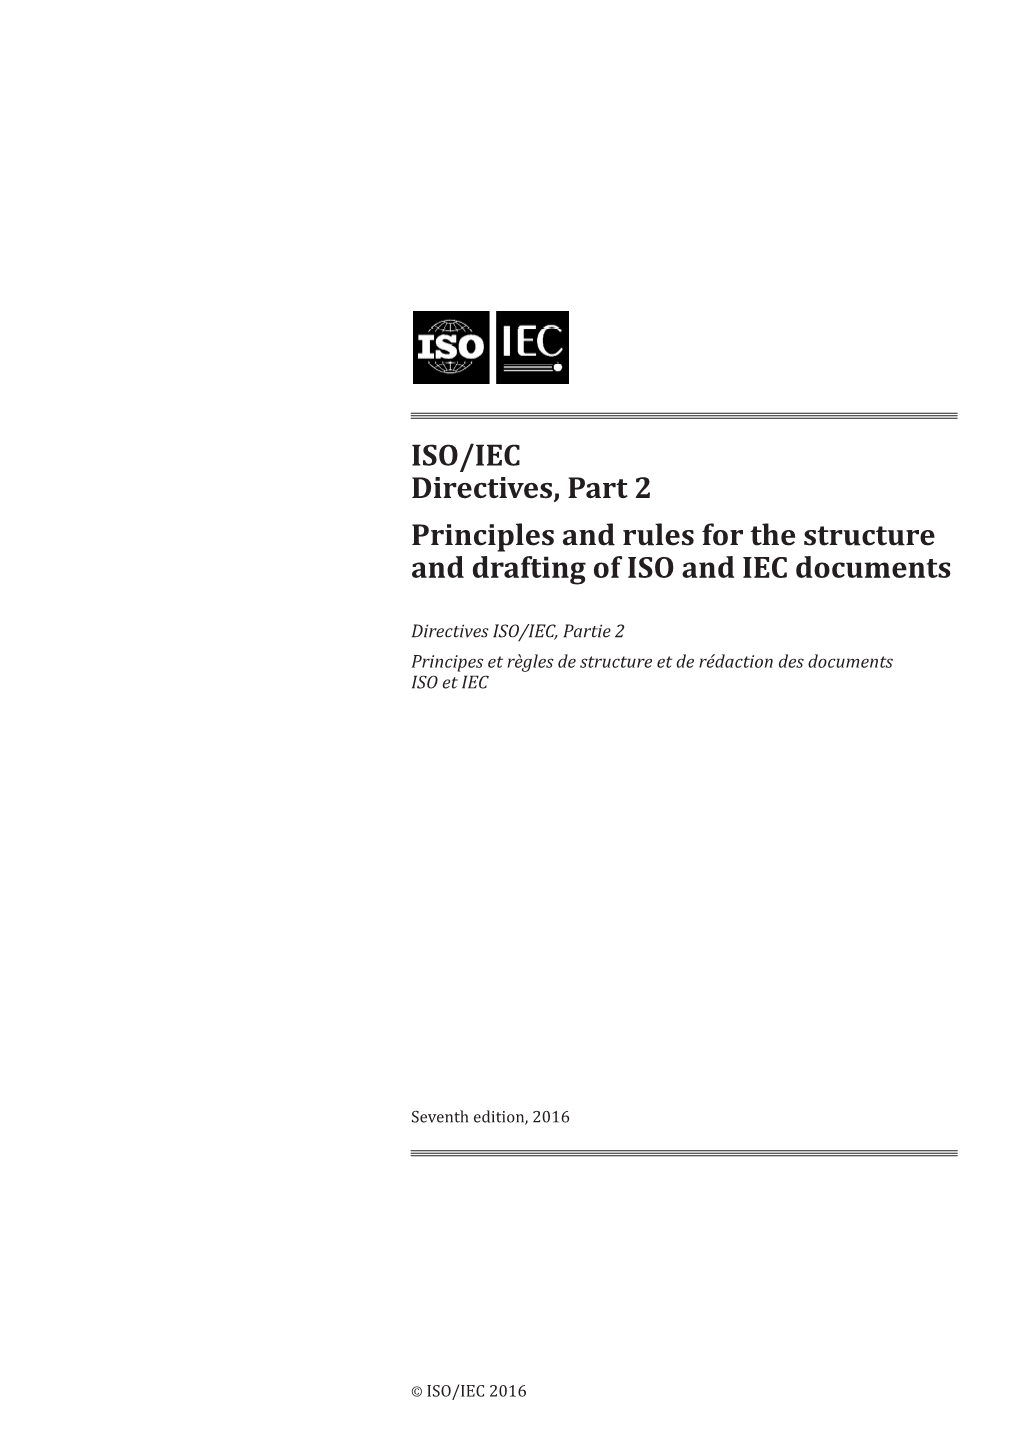 ISO/IEC Directives, Part 2 Principles and Rules for the Structure and Drafting of ISO and IEC Documents